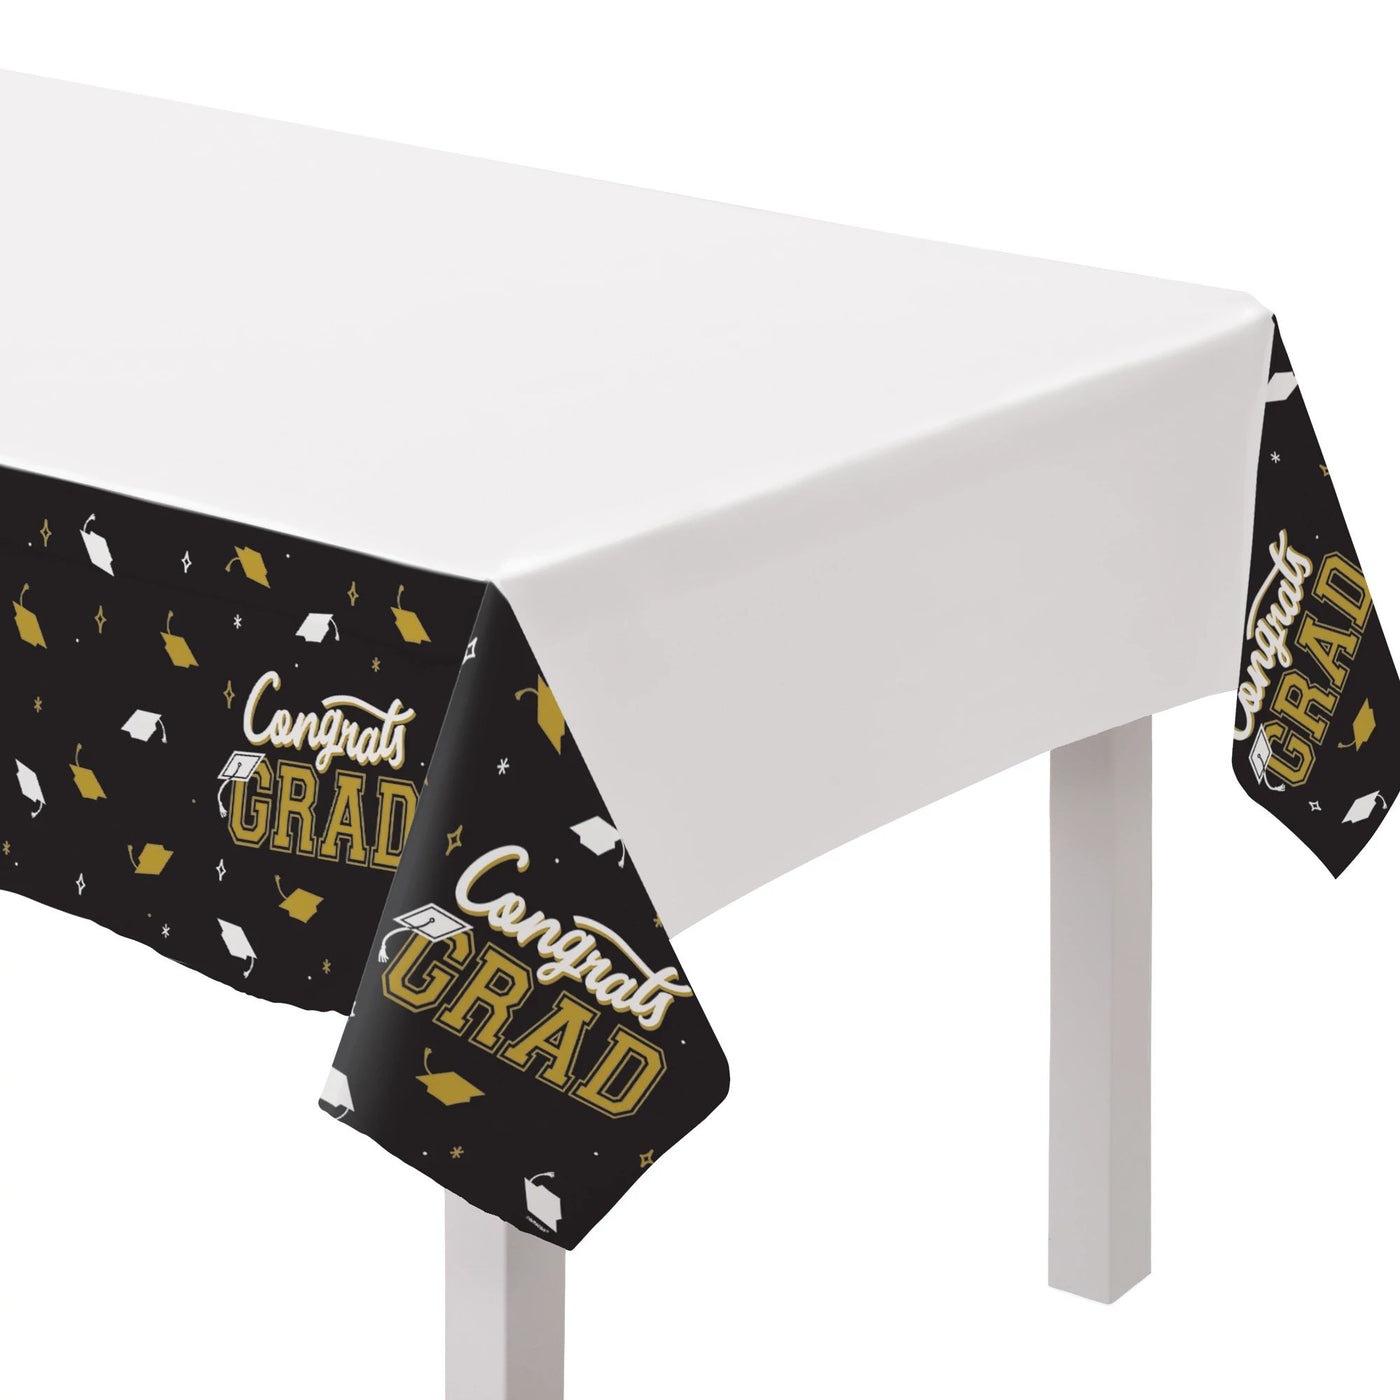 The Best is Yet to Come Graduation Table Cover